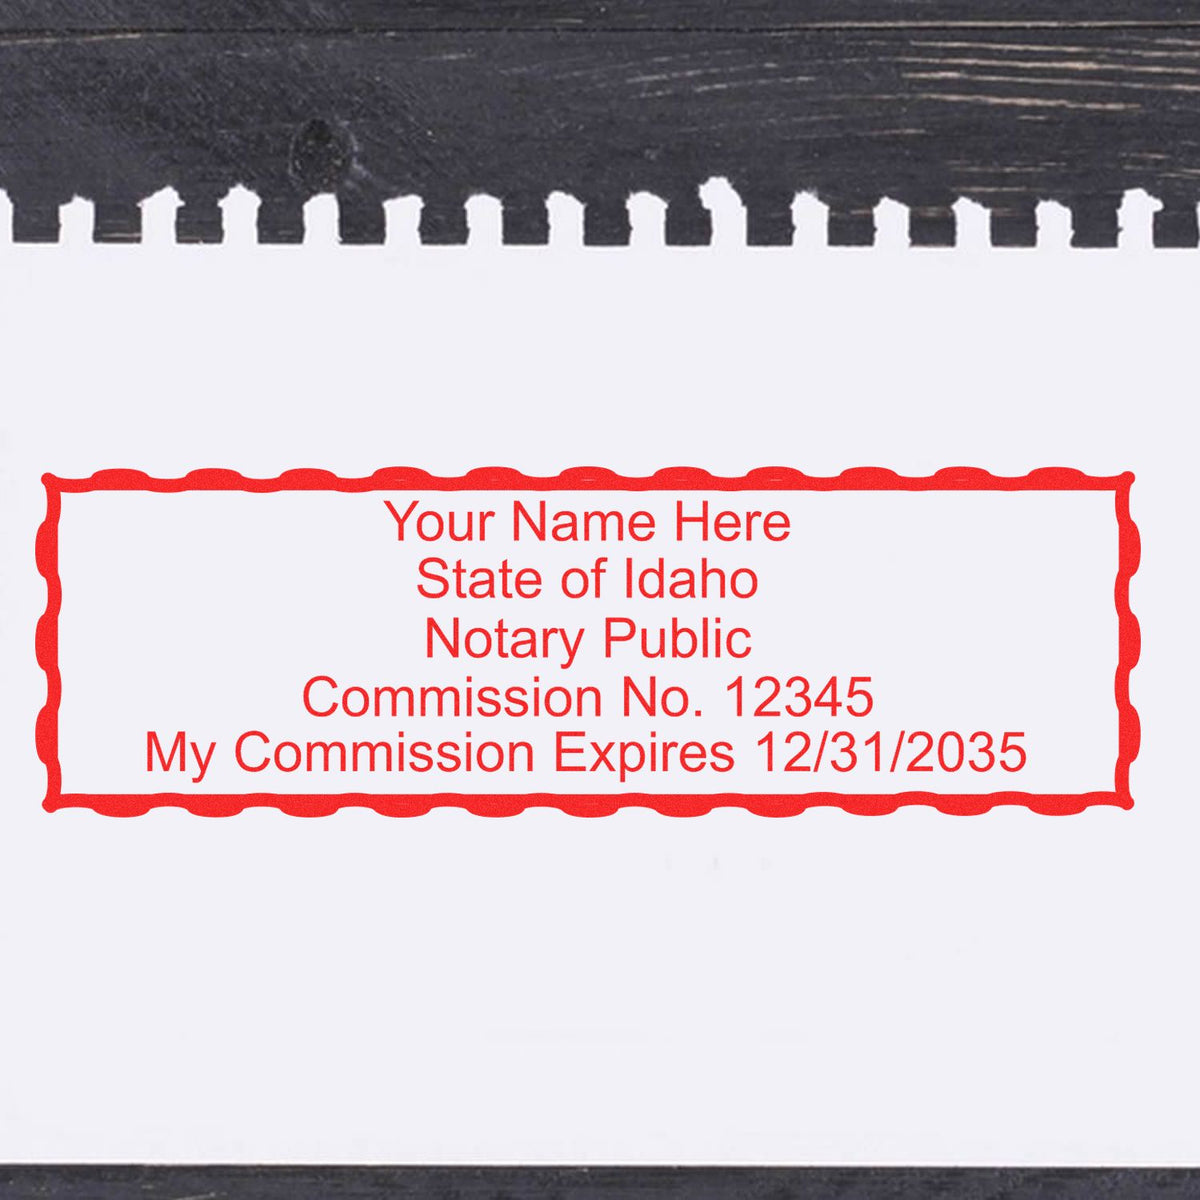 An alternative view of the MaxLight Premium Pre-Inked Idaho Rectangular Notarial Stamp stamped on a sheet of paper showing the image in use